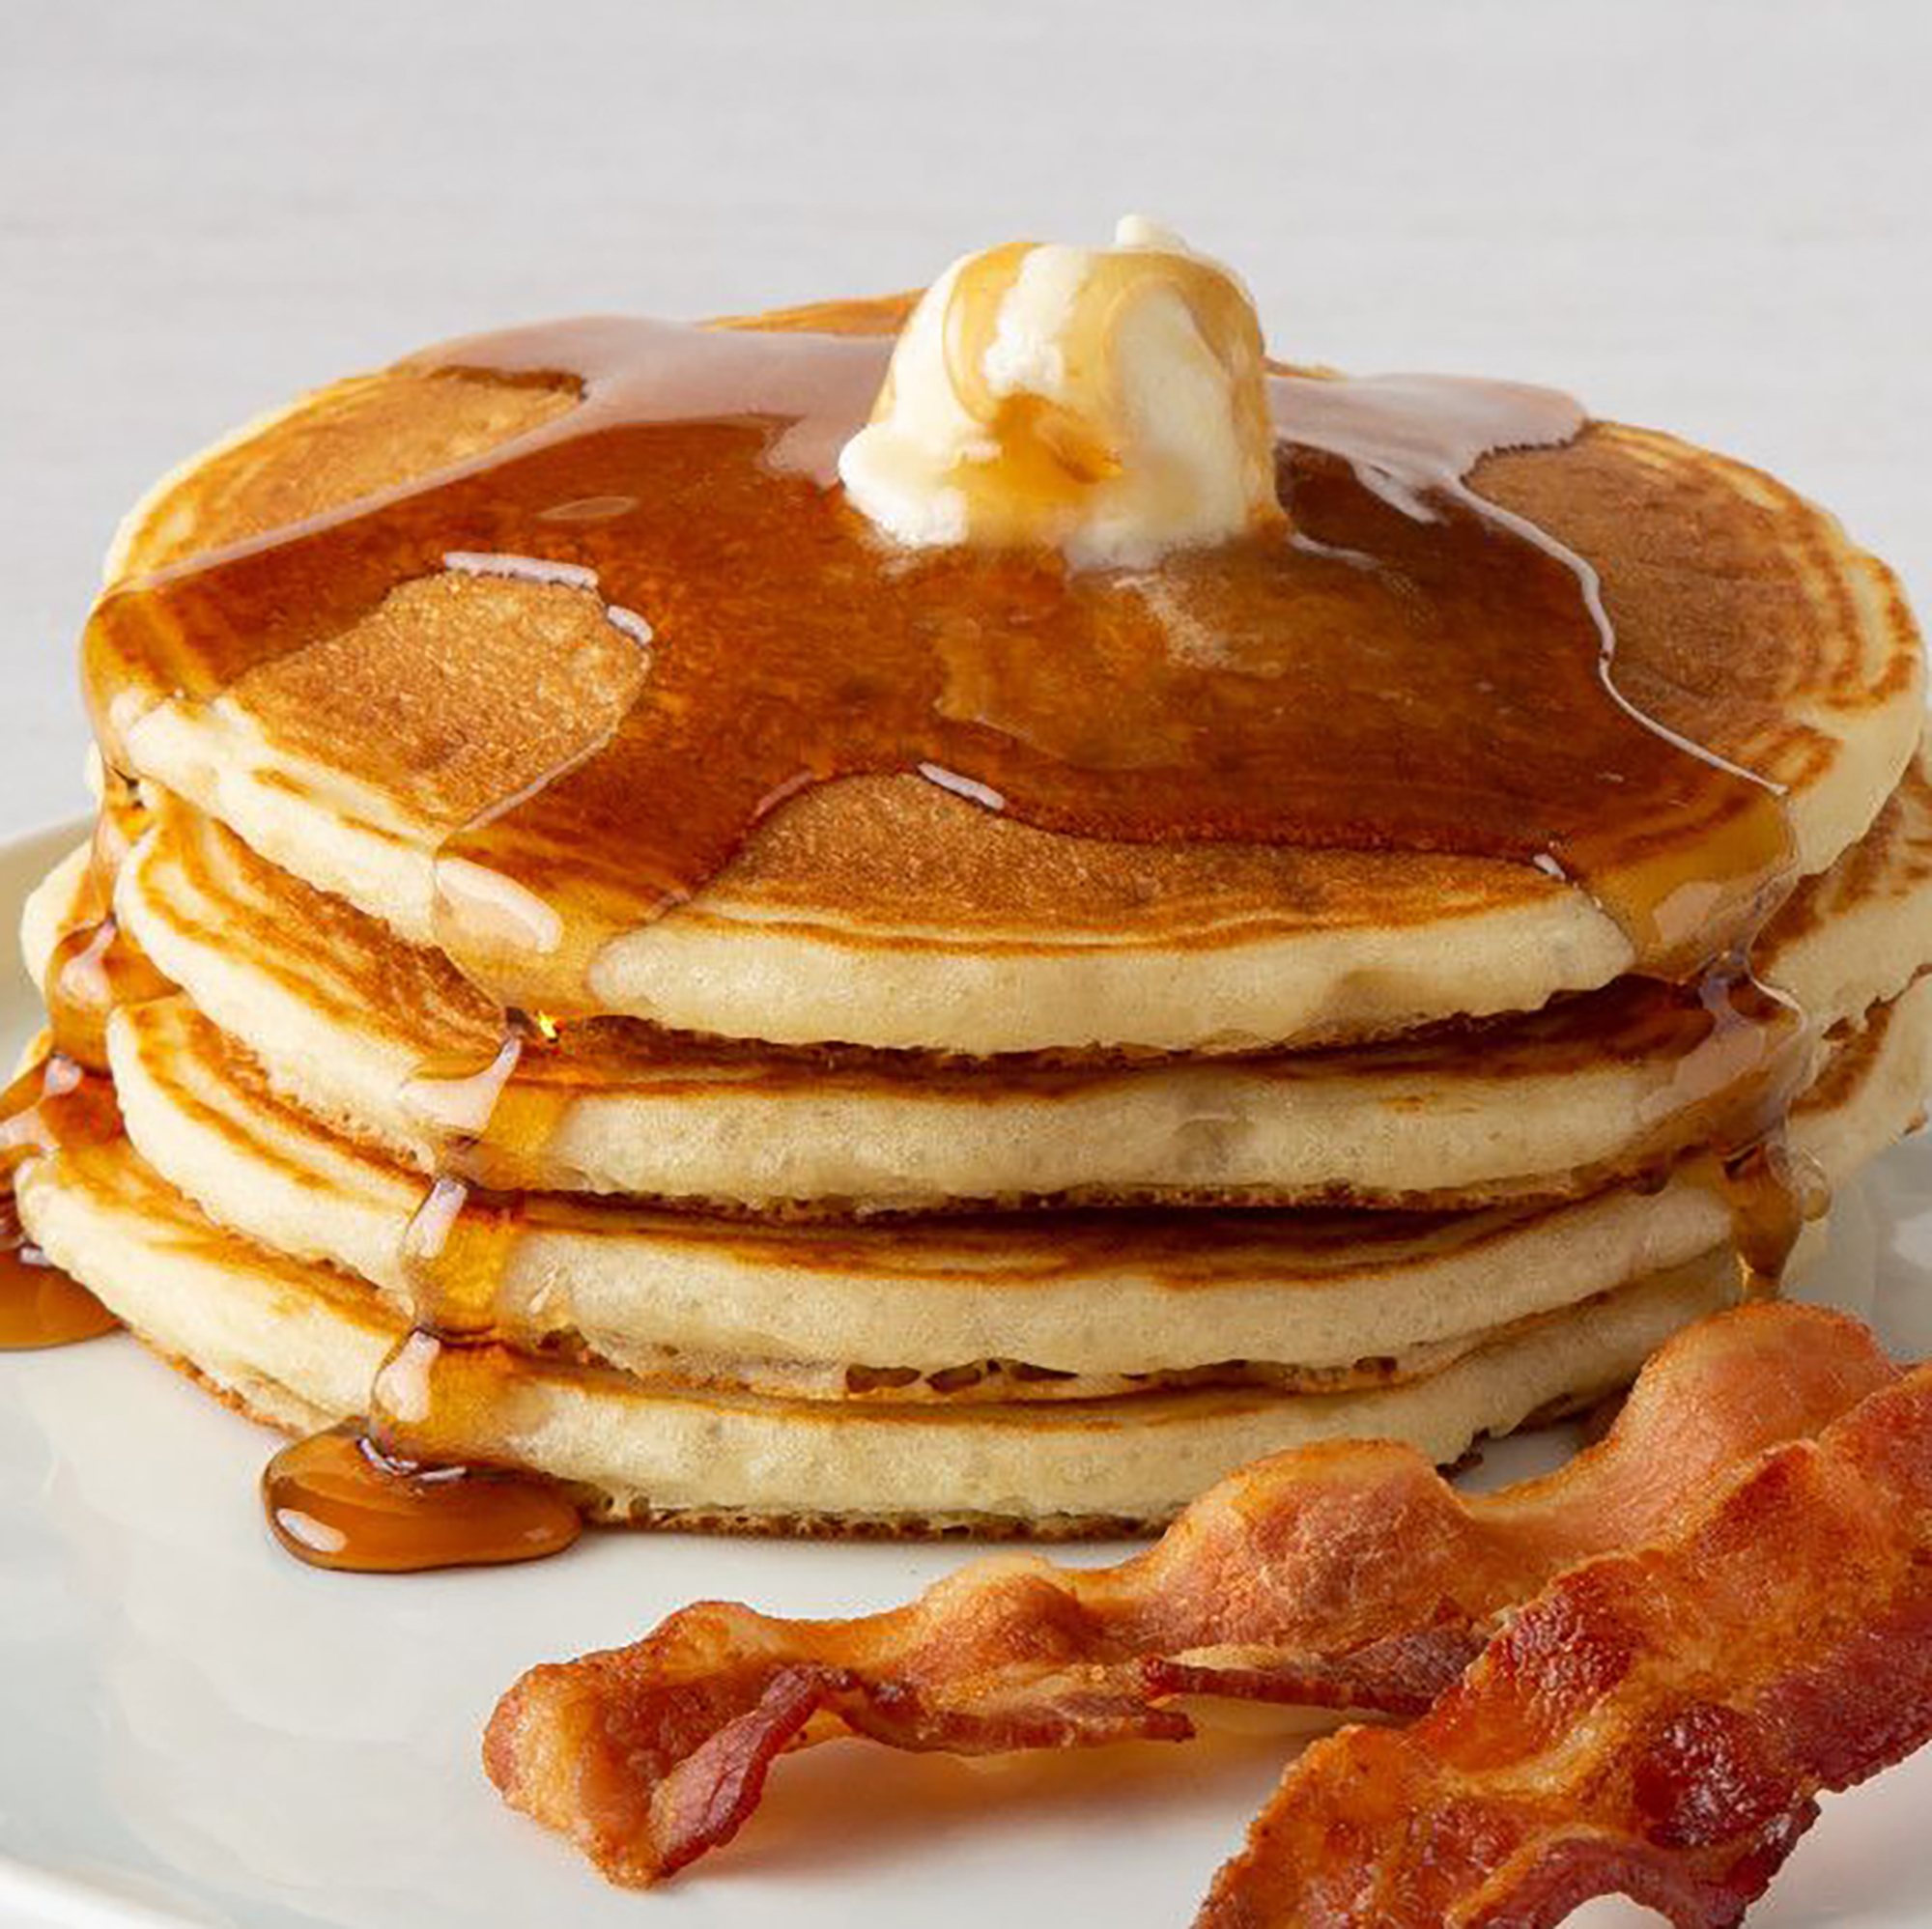 pancakes with syrup, butter and bacon - Bakers Square's menu